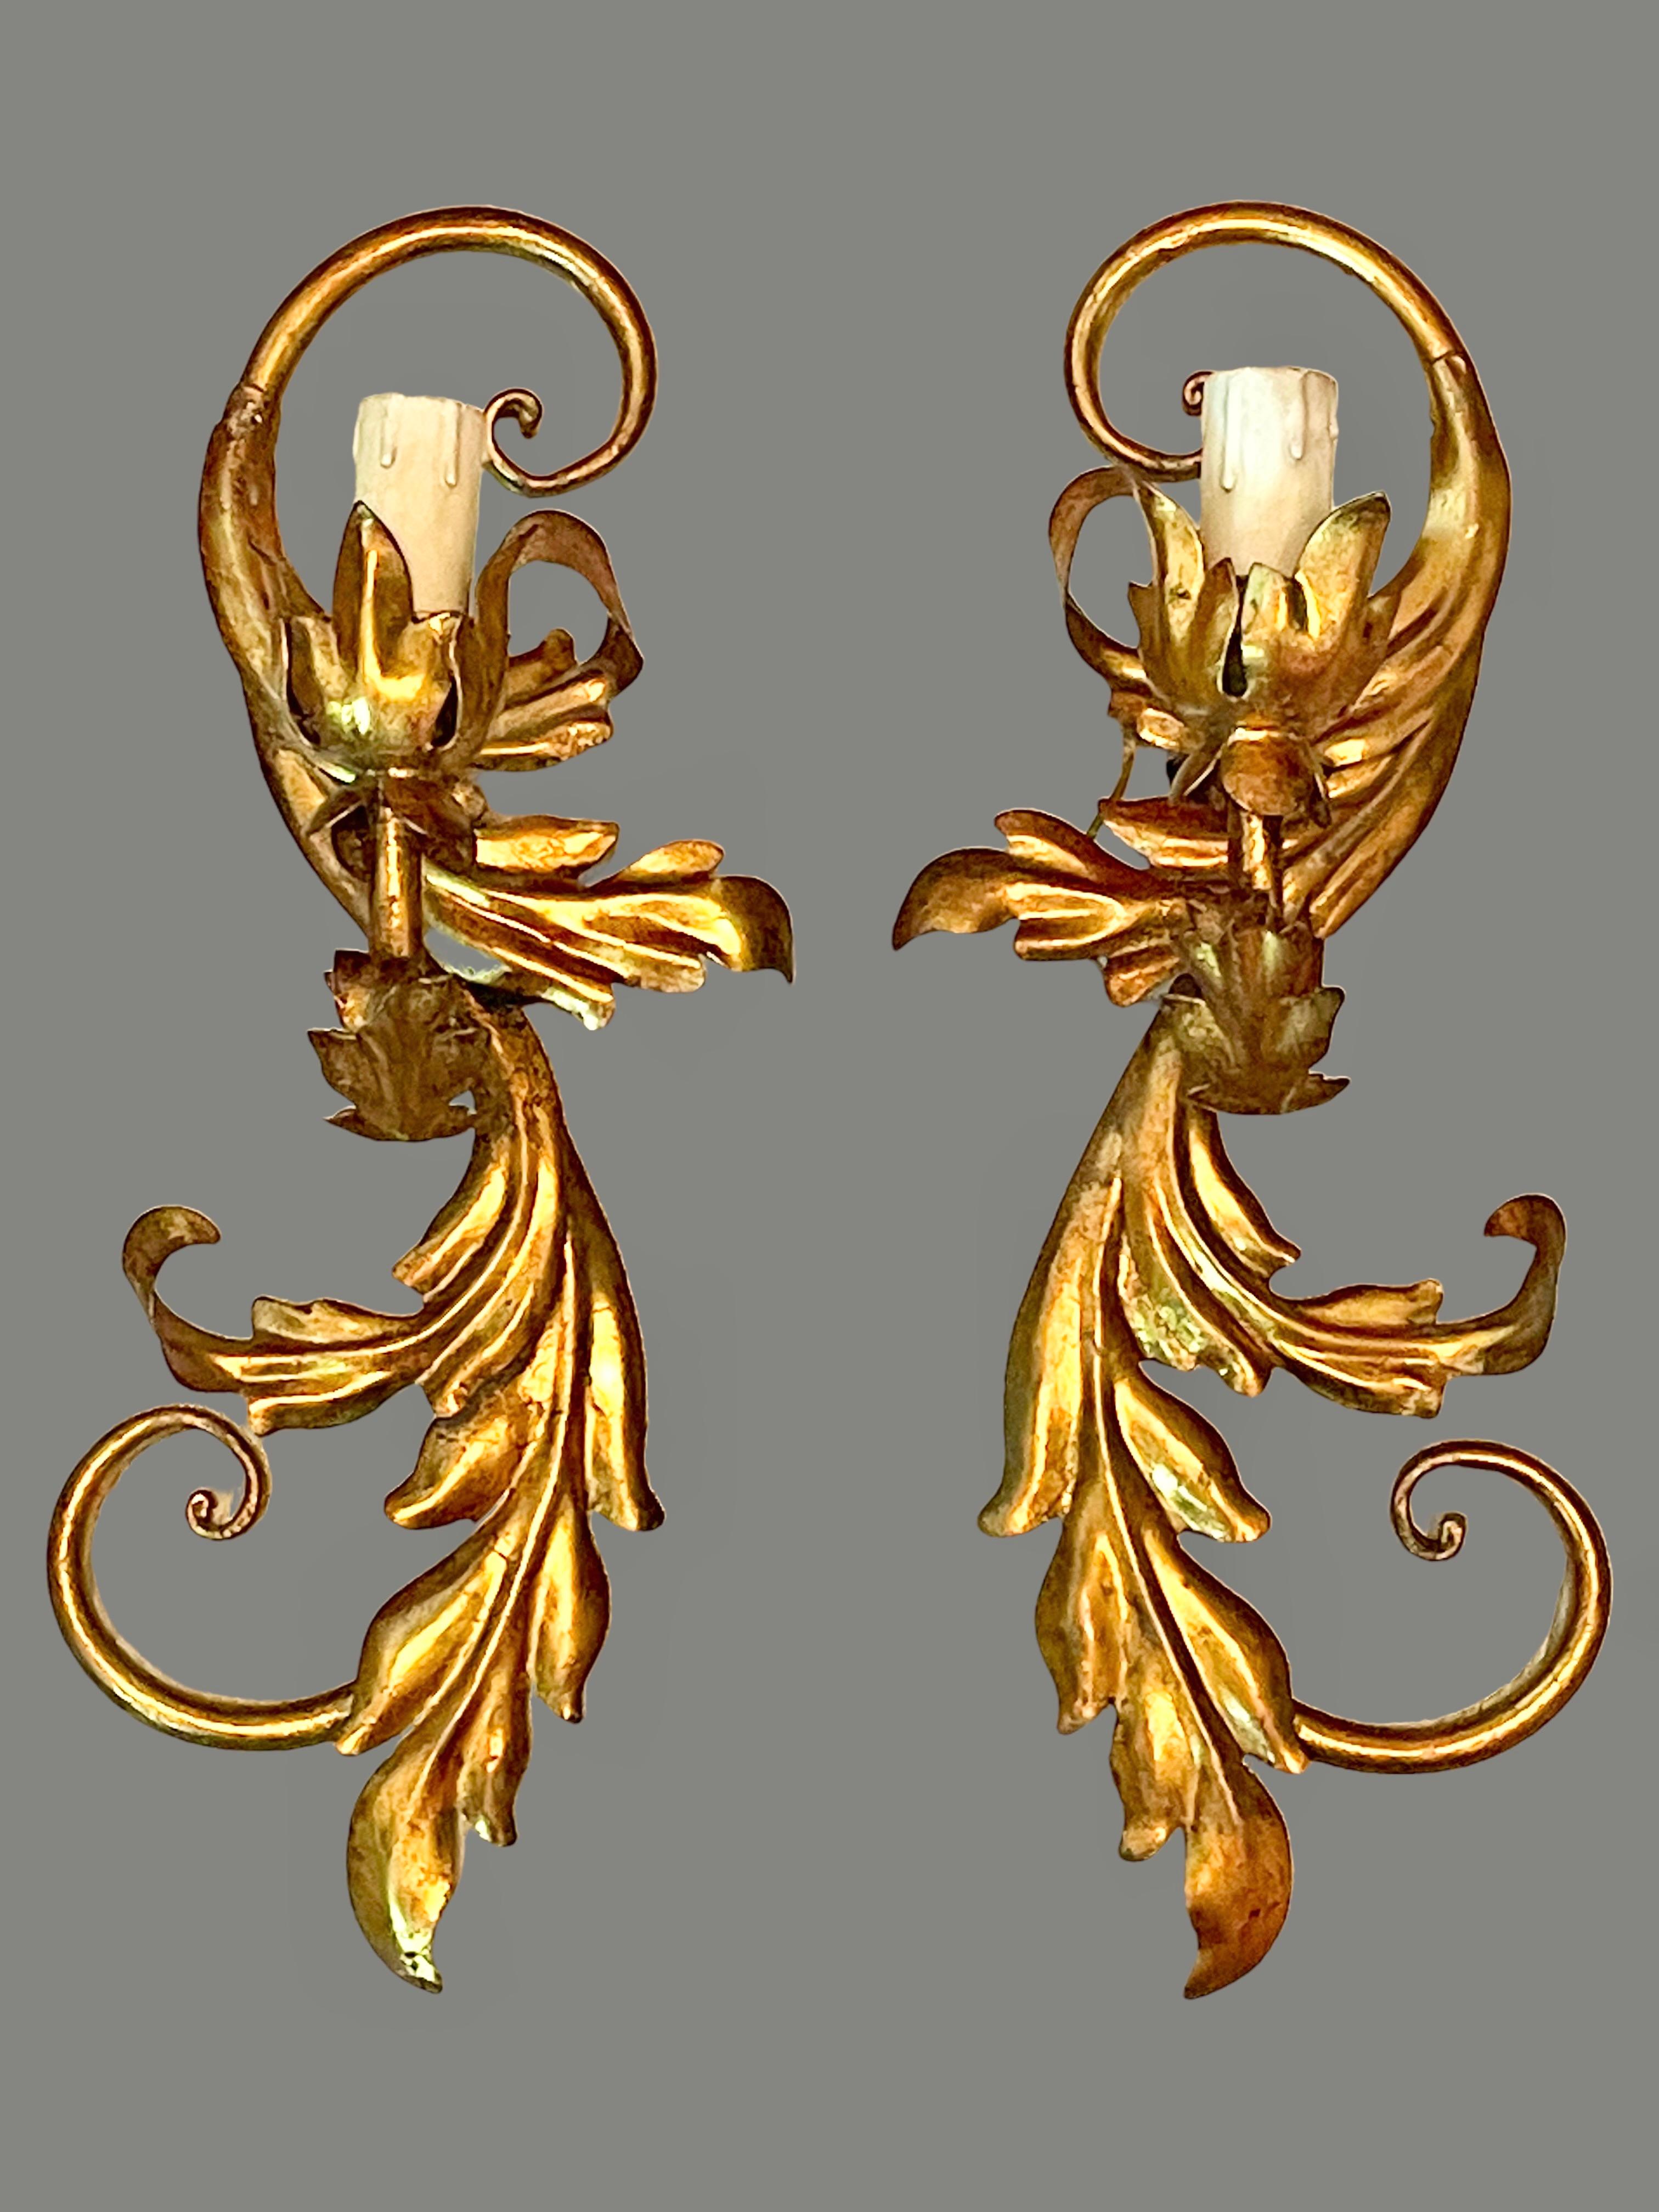 A pair Hollywood Regency midcentury gilt leaf tole sconces, each fixture requires a European E14 candelabra bulb, up to 40 watts. The wall lights have a beautiful patina and give each room a eclectic statement. Made by Koegel Kogl Leuchten Germany.